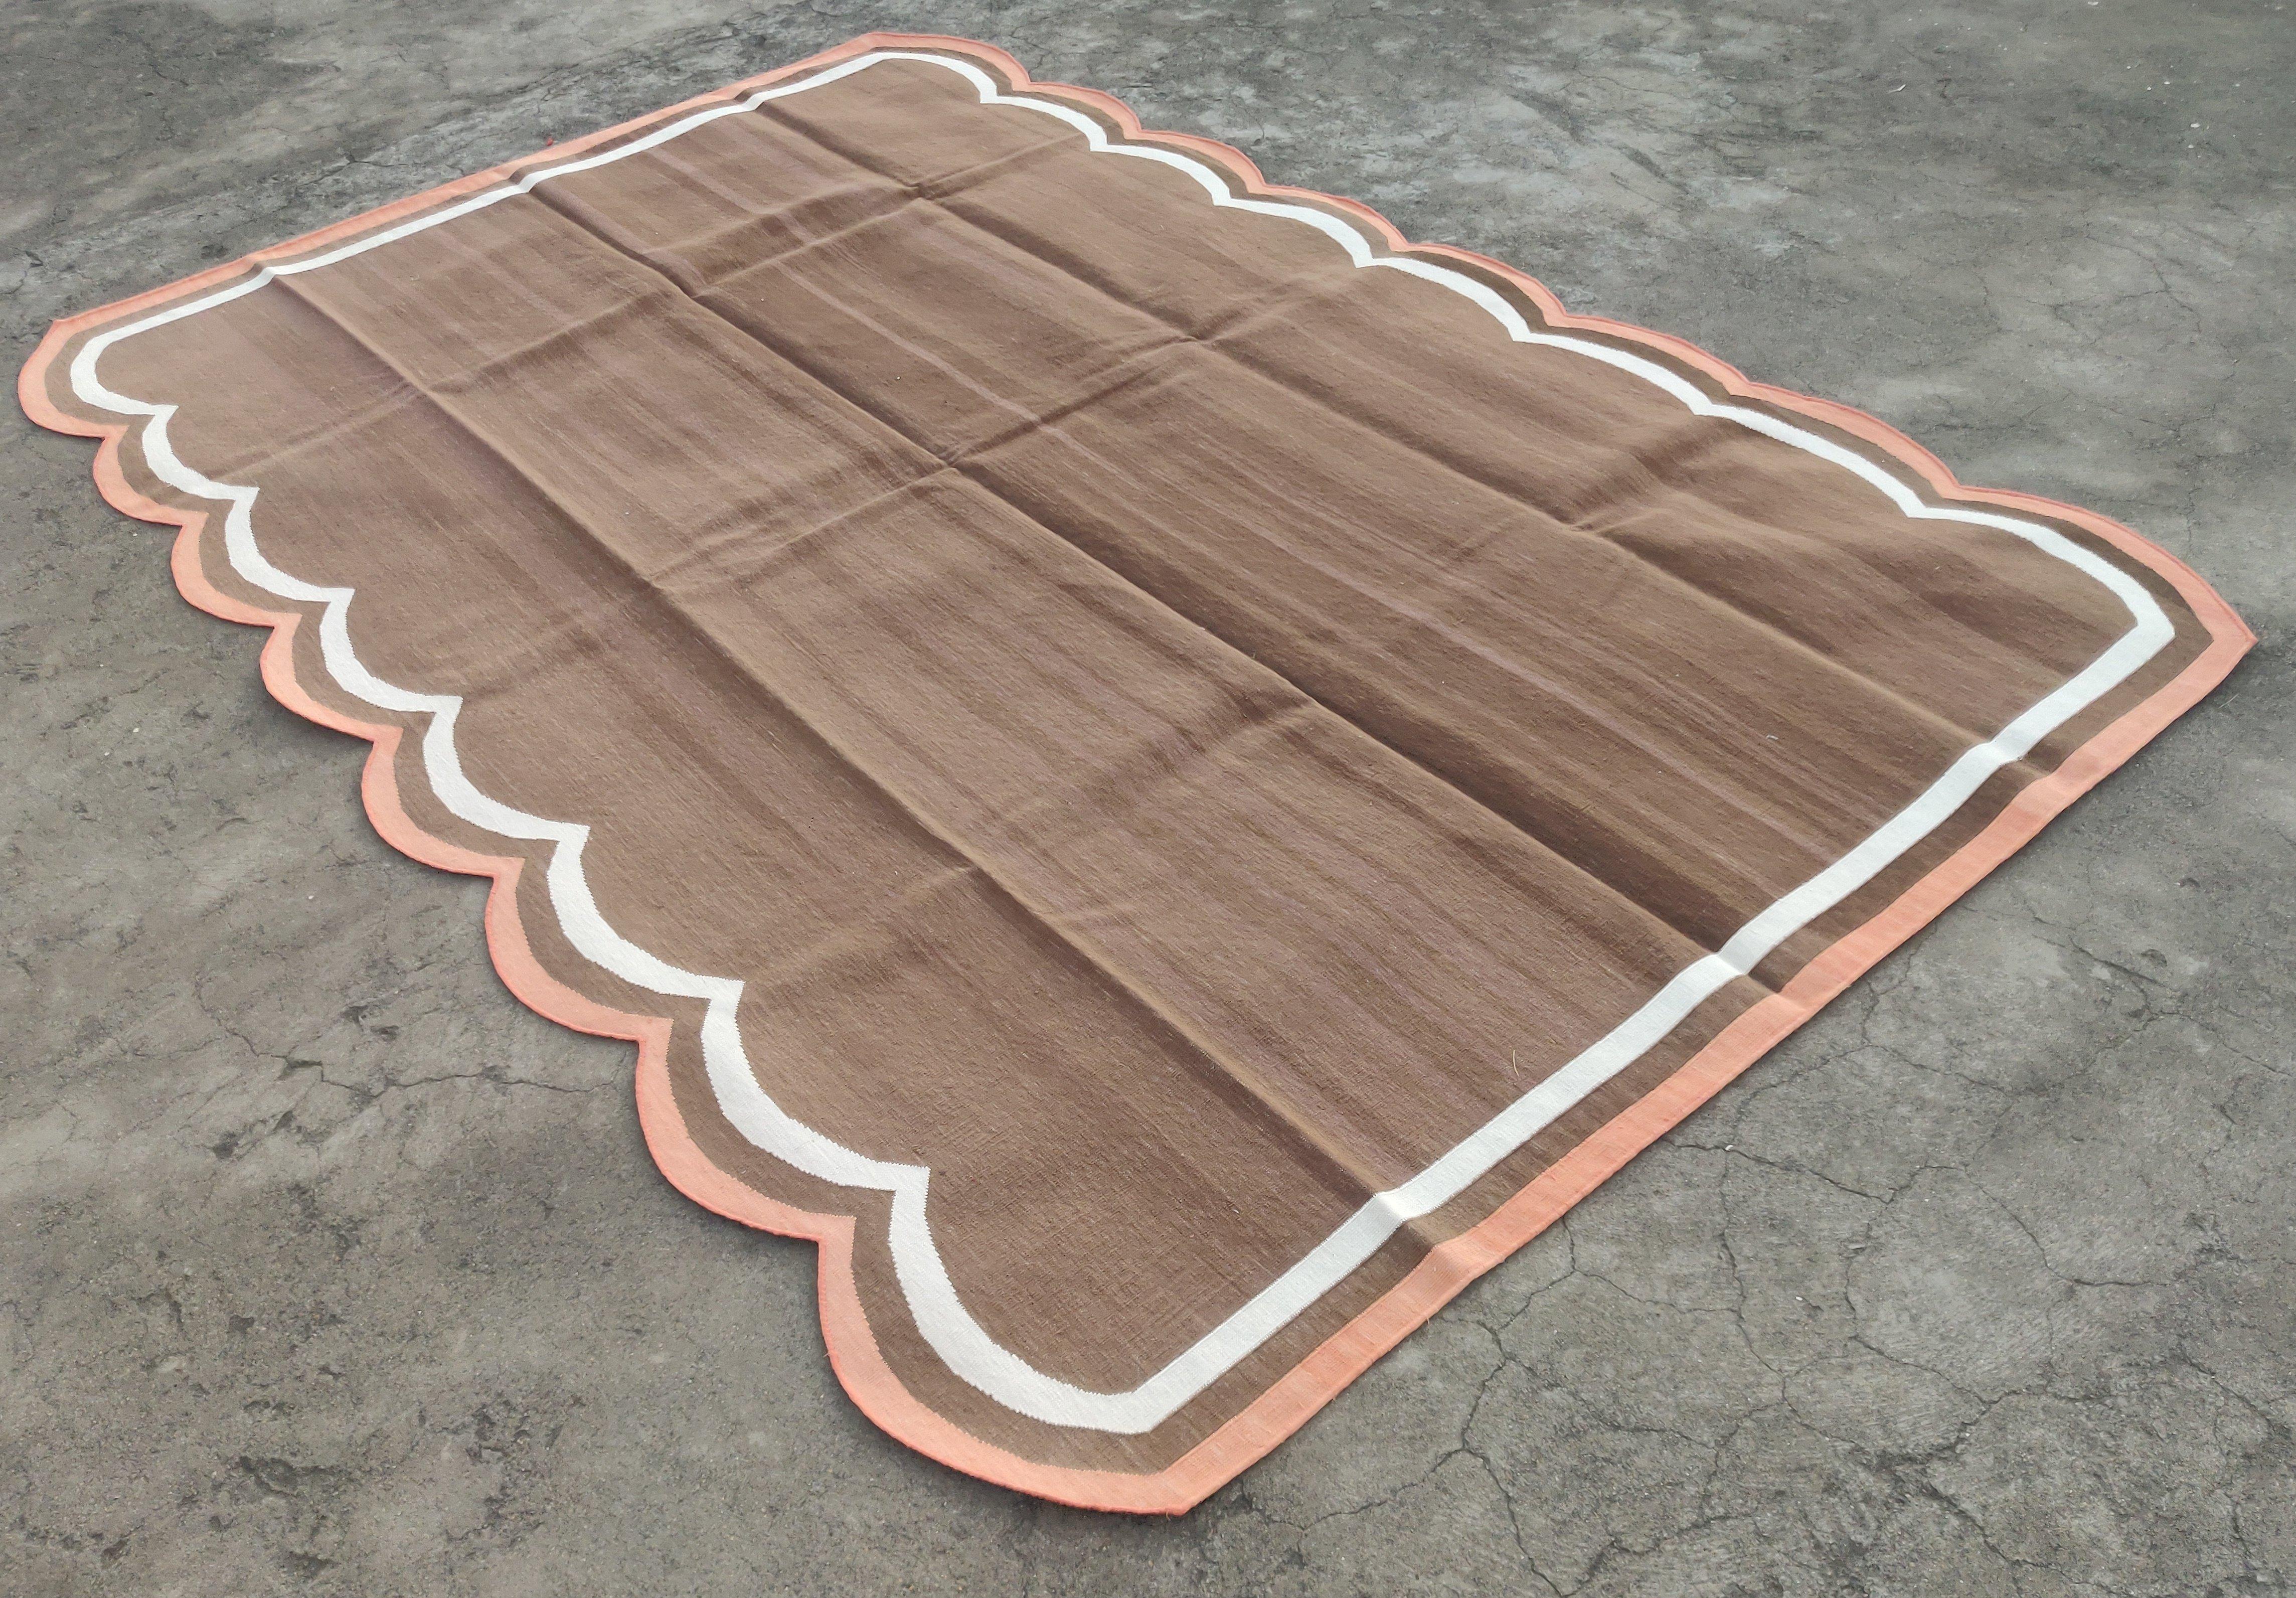 Cotton Vegetable Dyed Coffee Brown And Coral Scalloped Striped Indian Dhurrie Rug-6'x9' 
These special flat-weave dhurries are hand-woven with 15 ply 100% cotton yarn. Due to the special manufacturing techniques used to create our rugs, the size and